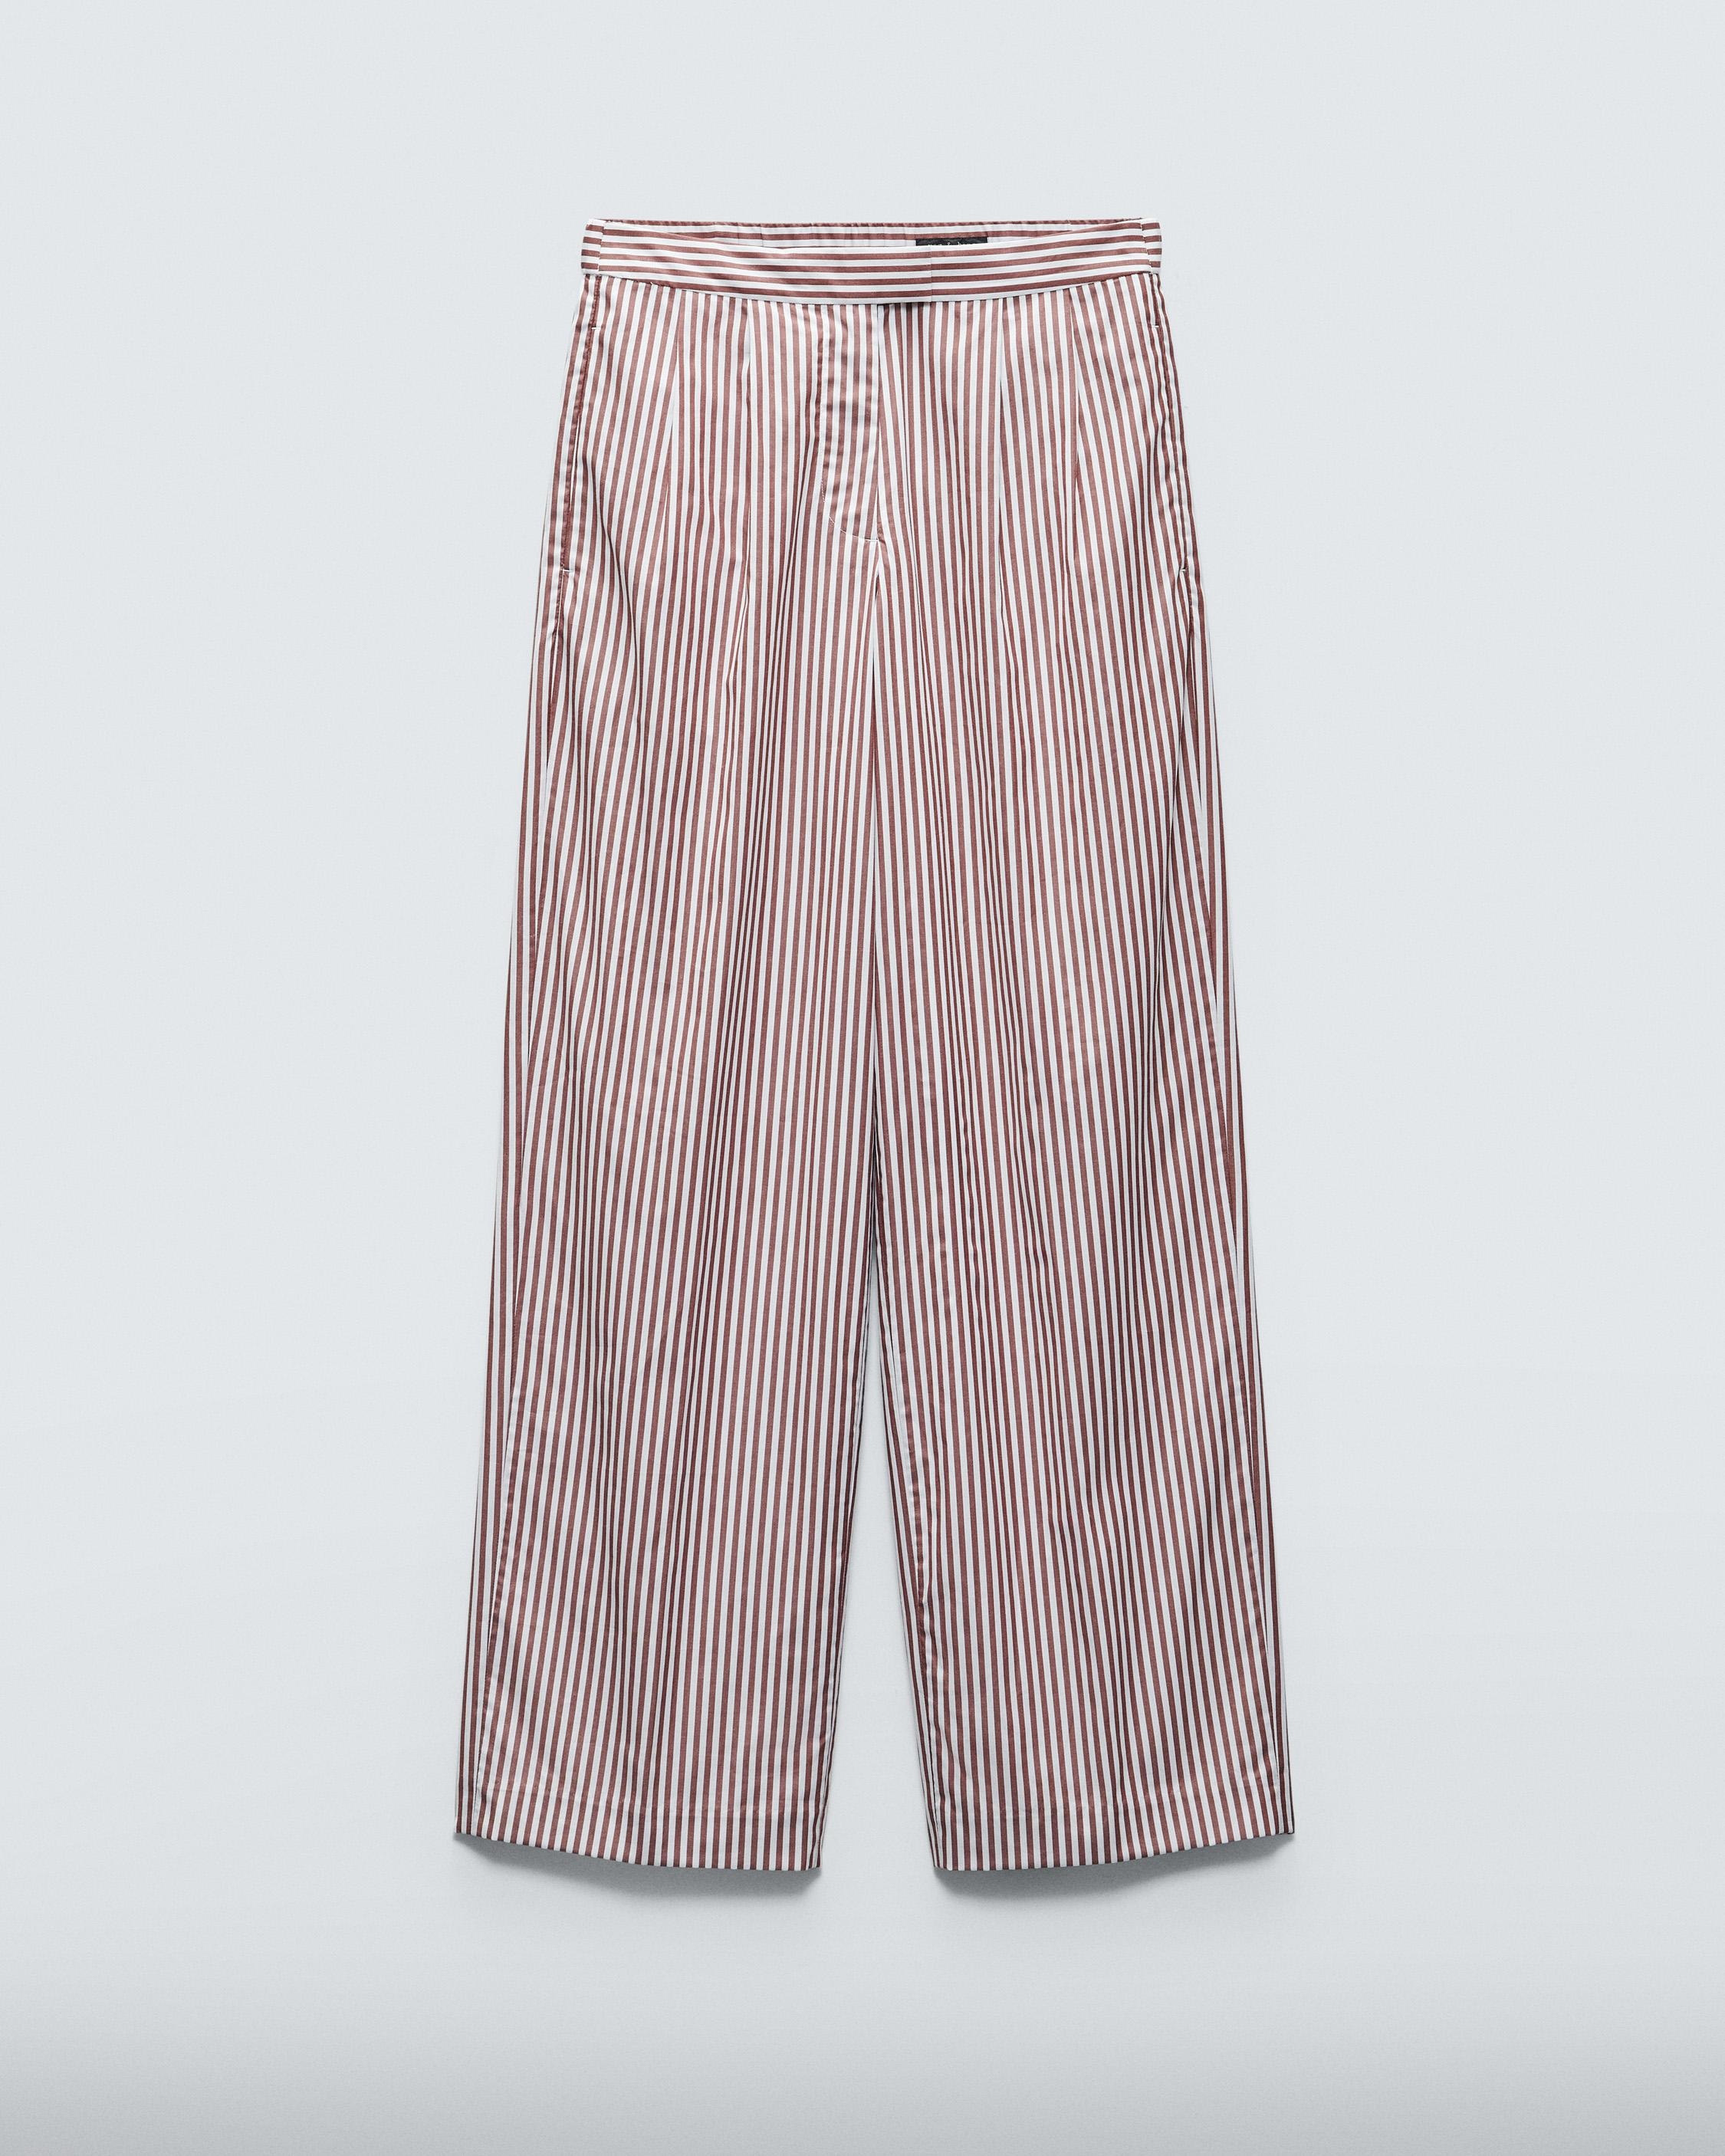 Lacey Stripe Cotton Poplin Pant
Relaxed Fit - 1